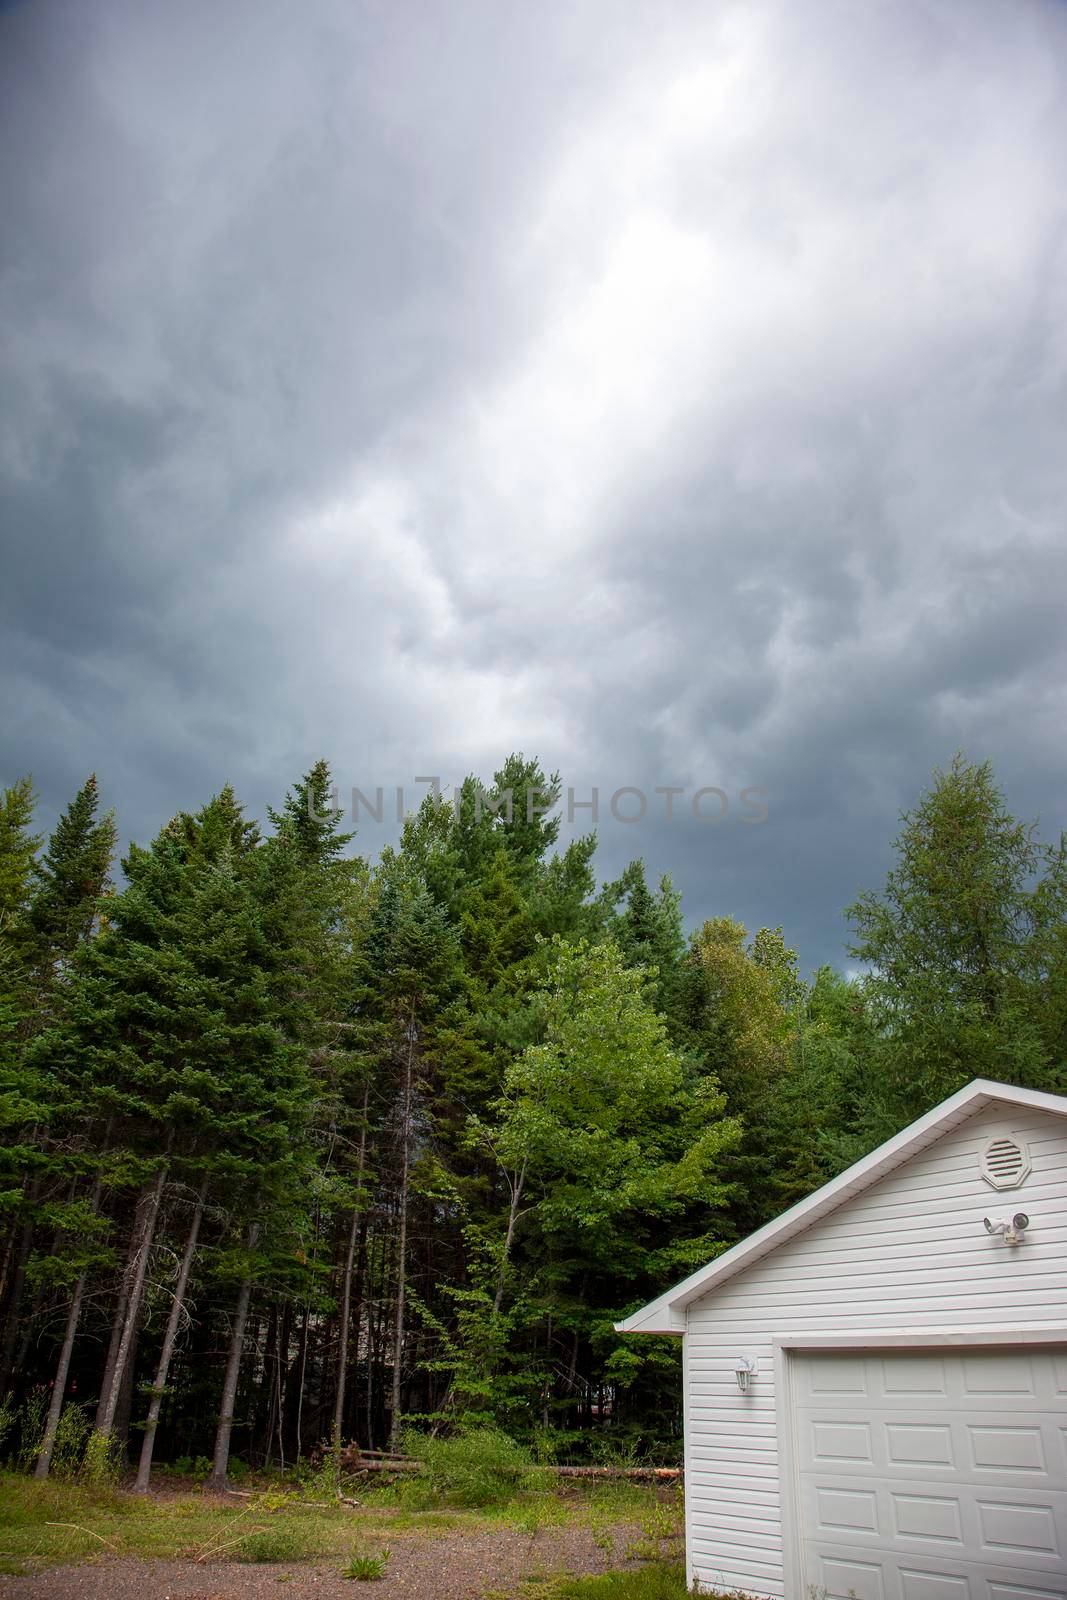 storm brewing beyond trees and shed by rustycanuck